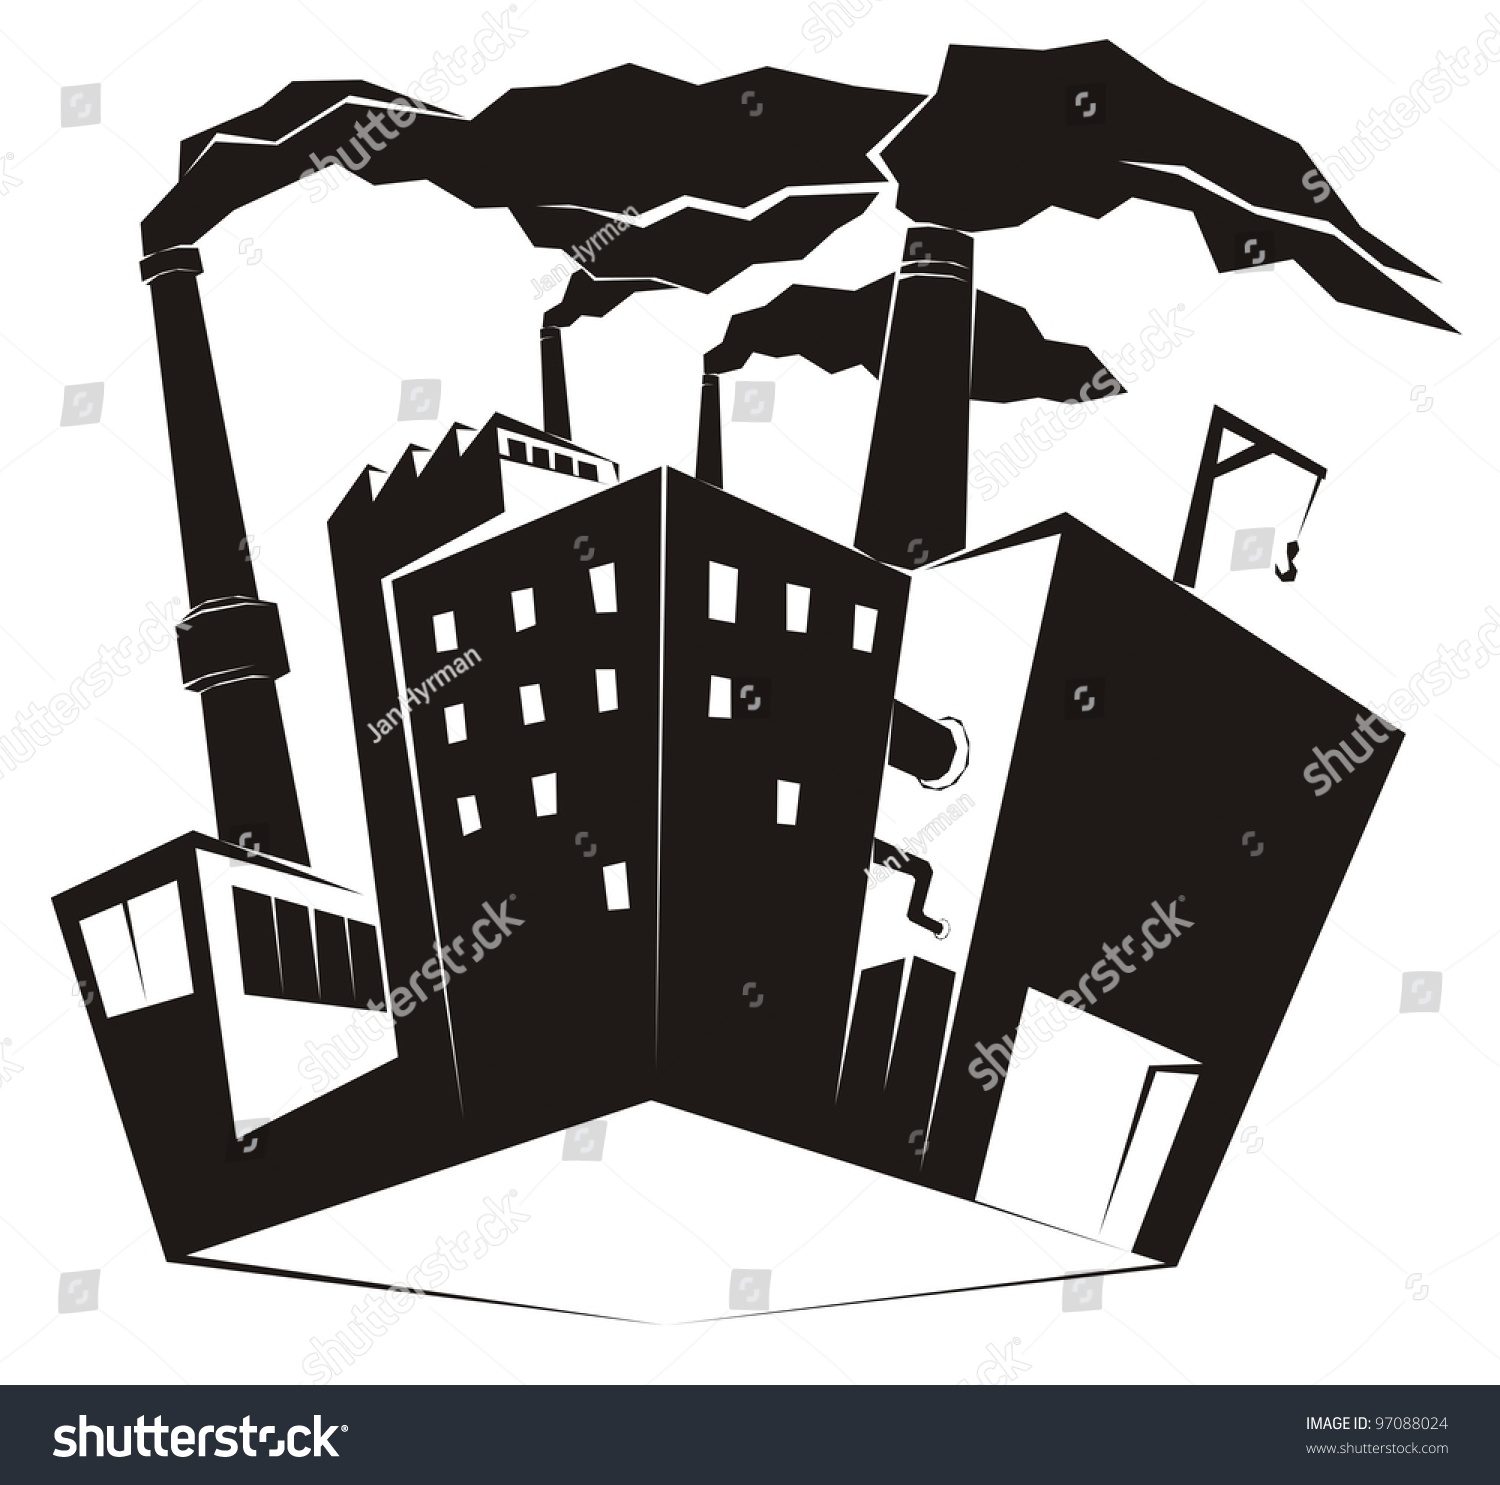 industrial clipart - photo #20